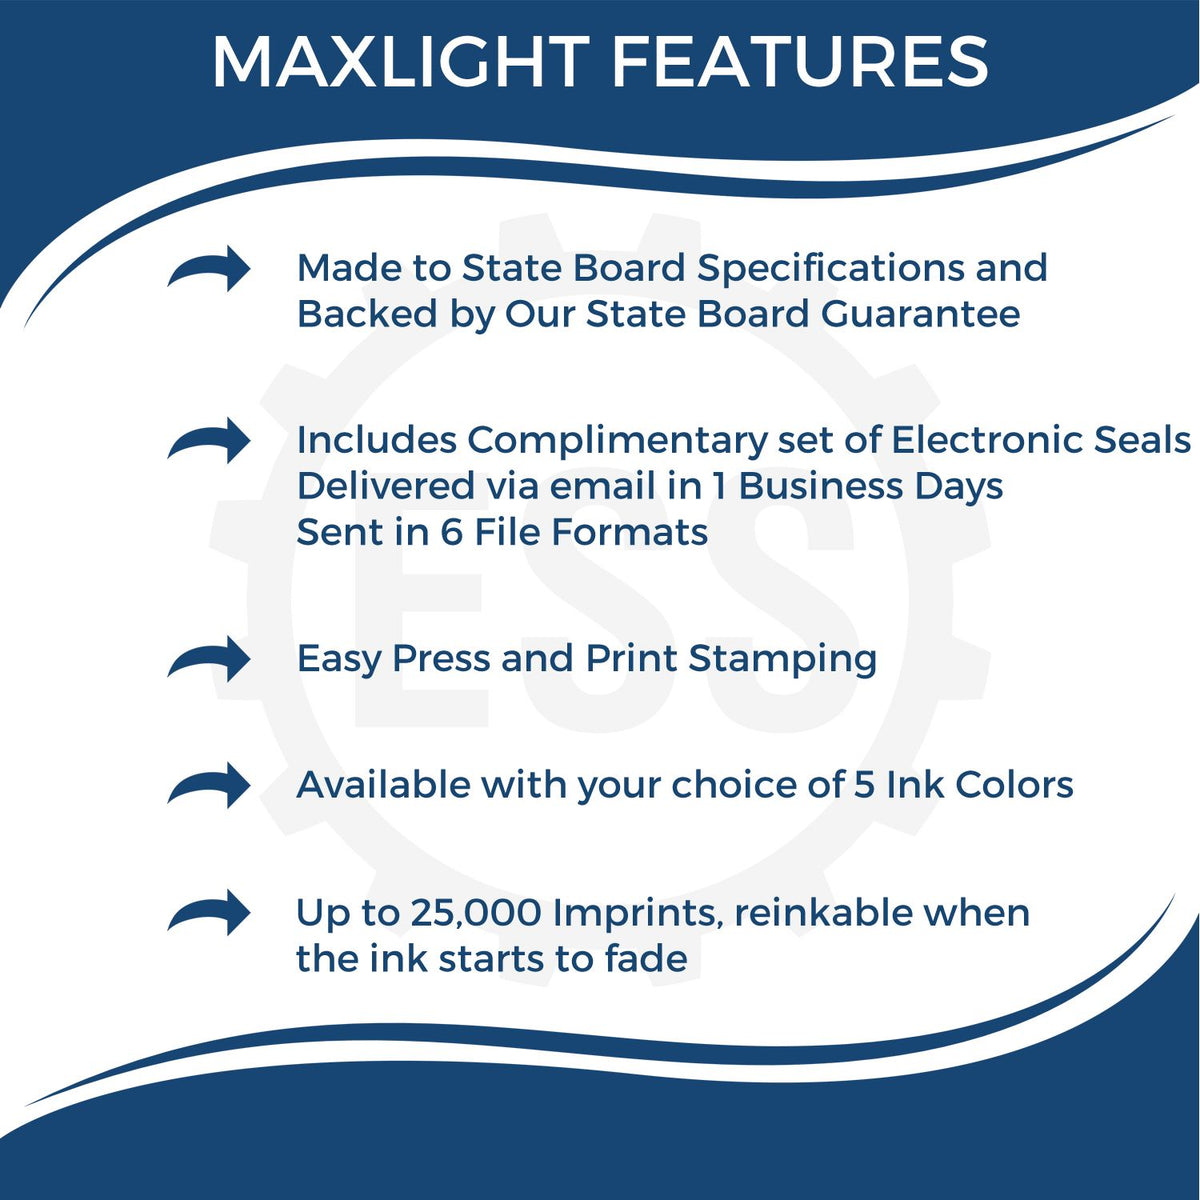 A picture of an infographic highlighting the selling points for the MaxLight Premium Pre-Inked Virginia State Seal Notarial Stamp